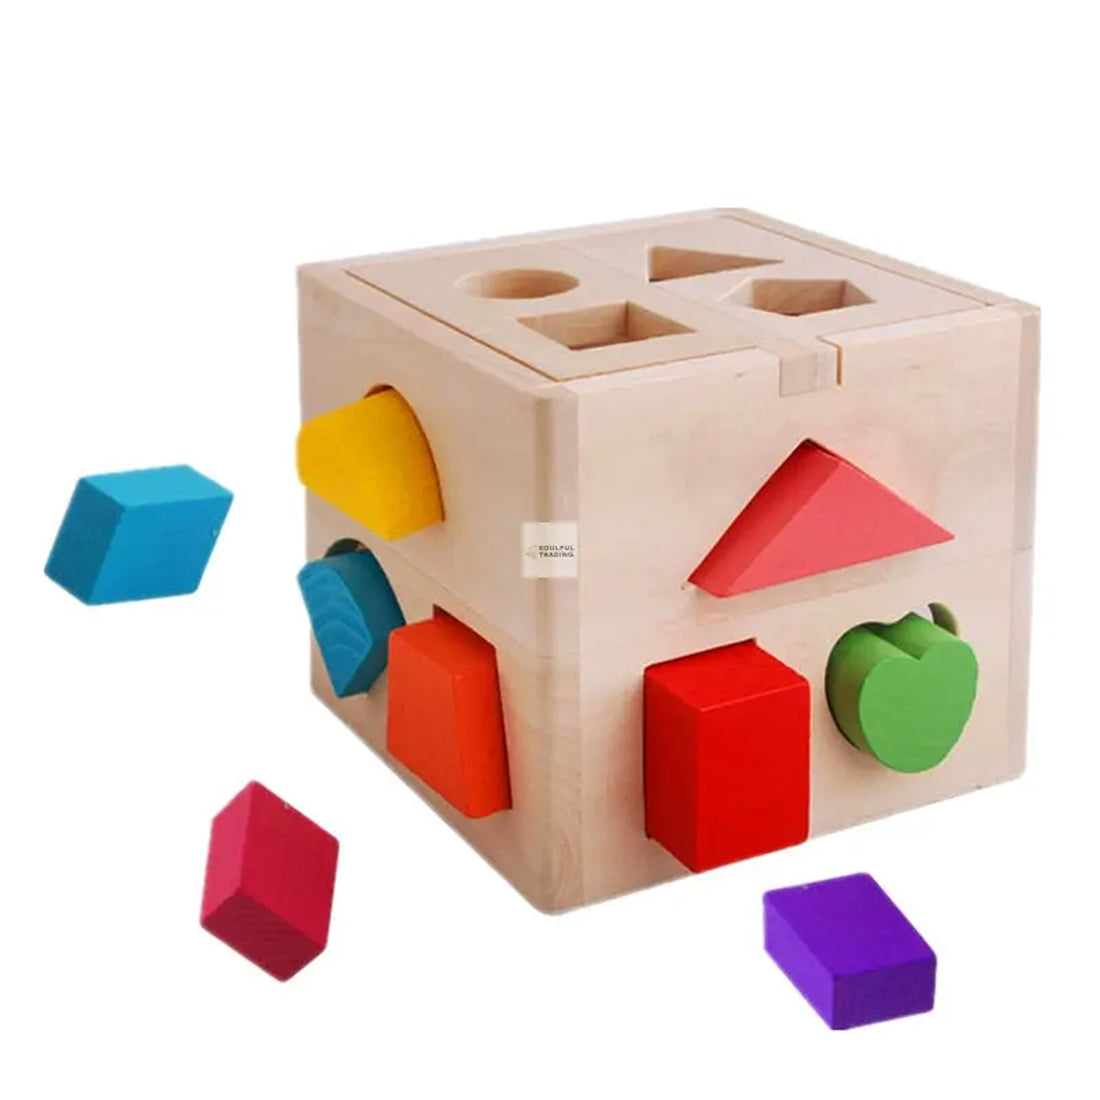 Soulful Trading Montessori Wooden Intelligence Box with various colored blocks including a triangle, square, and apple shapes scattered around it.